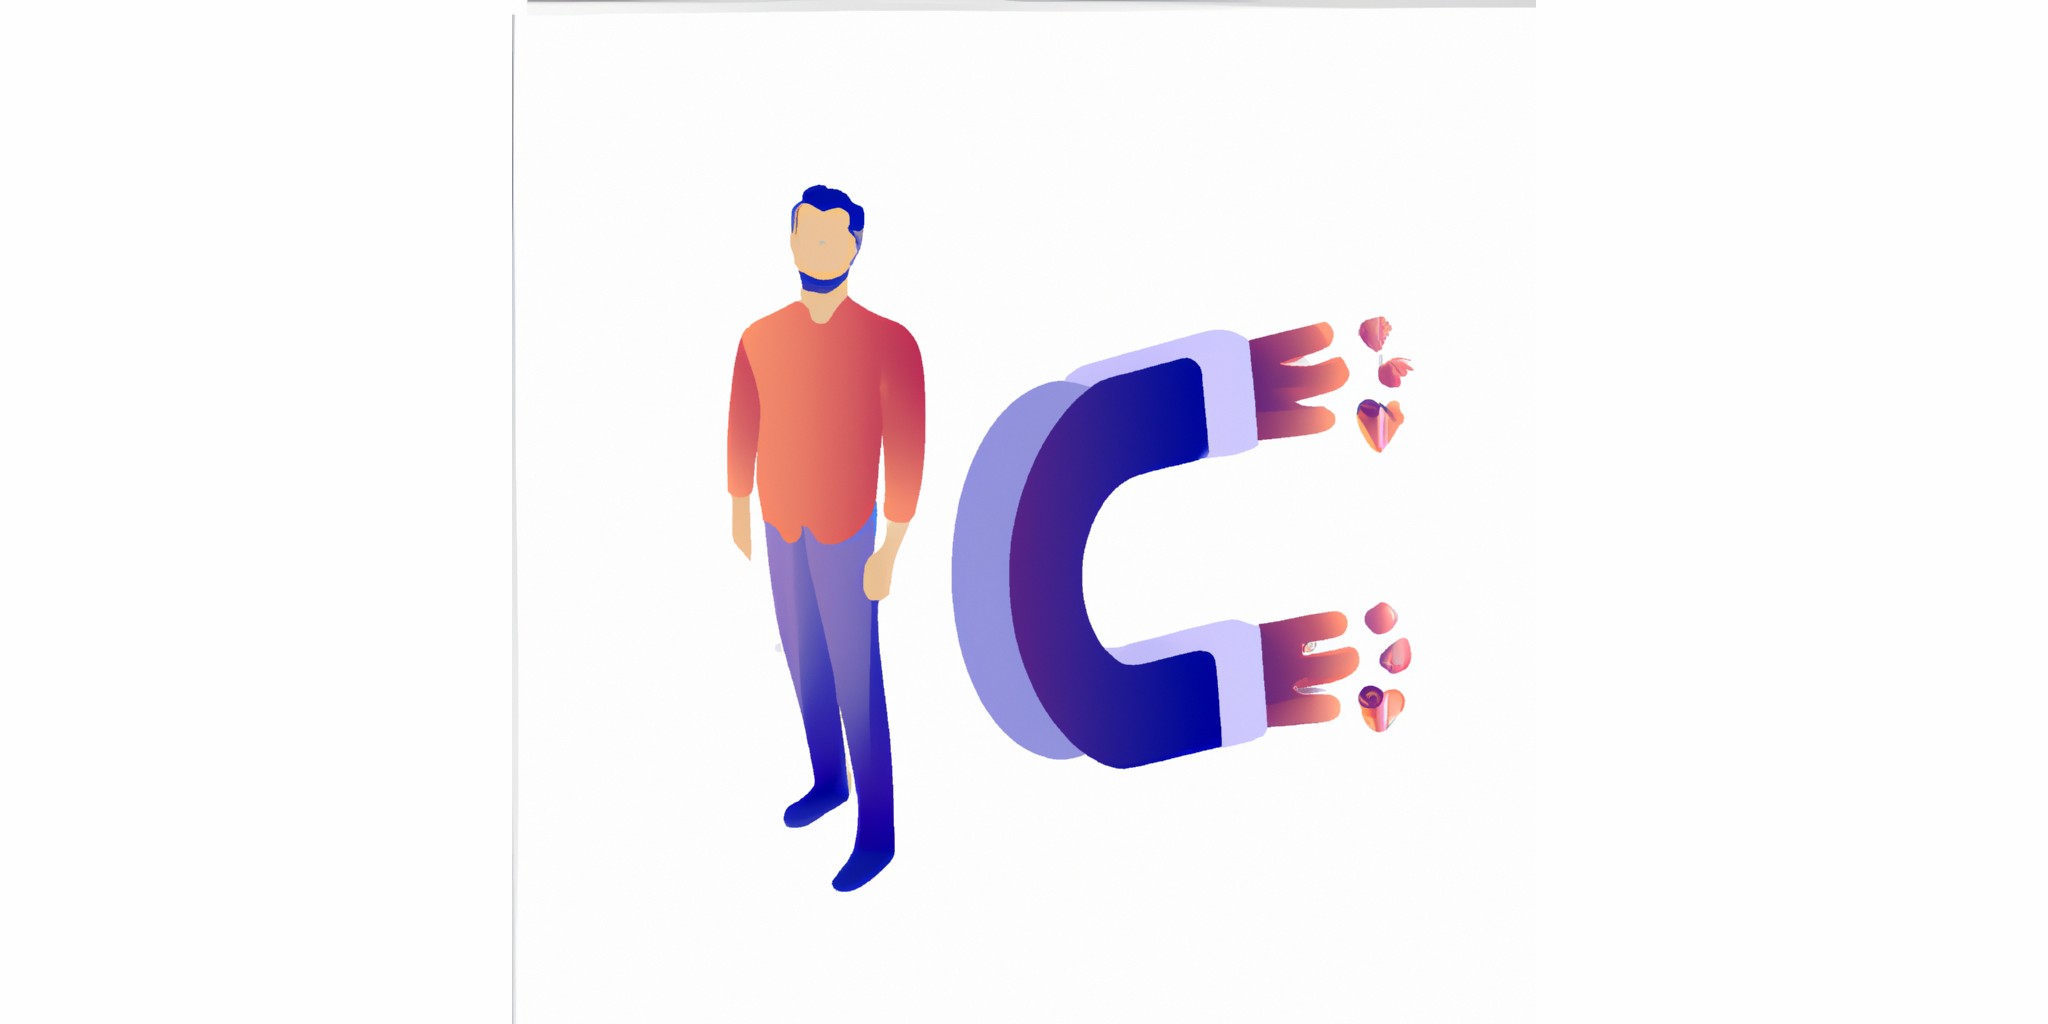 a magnet with a person in front in flat illustration style with gradients and white background